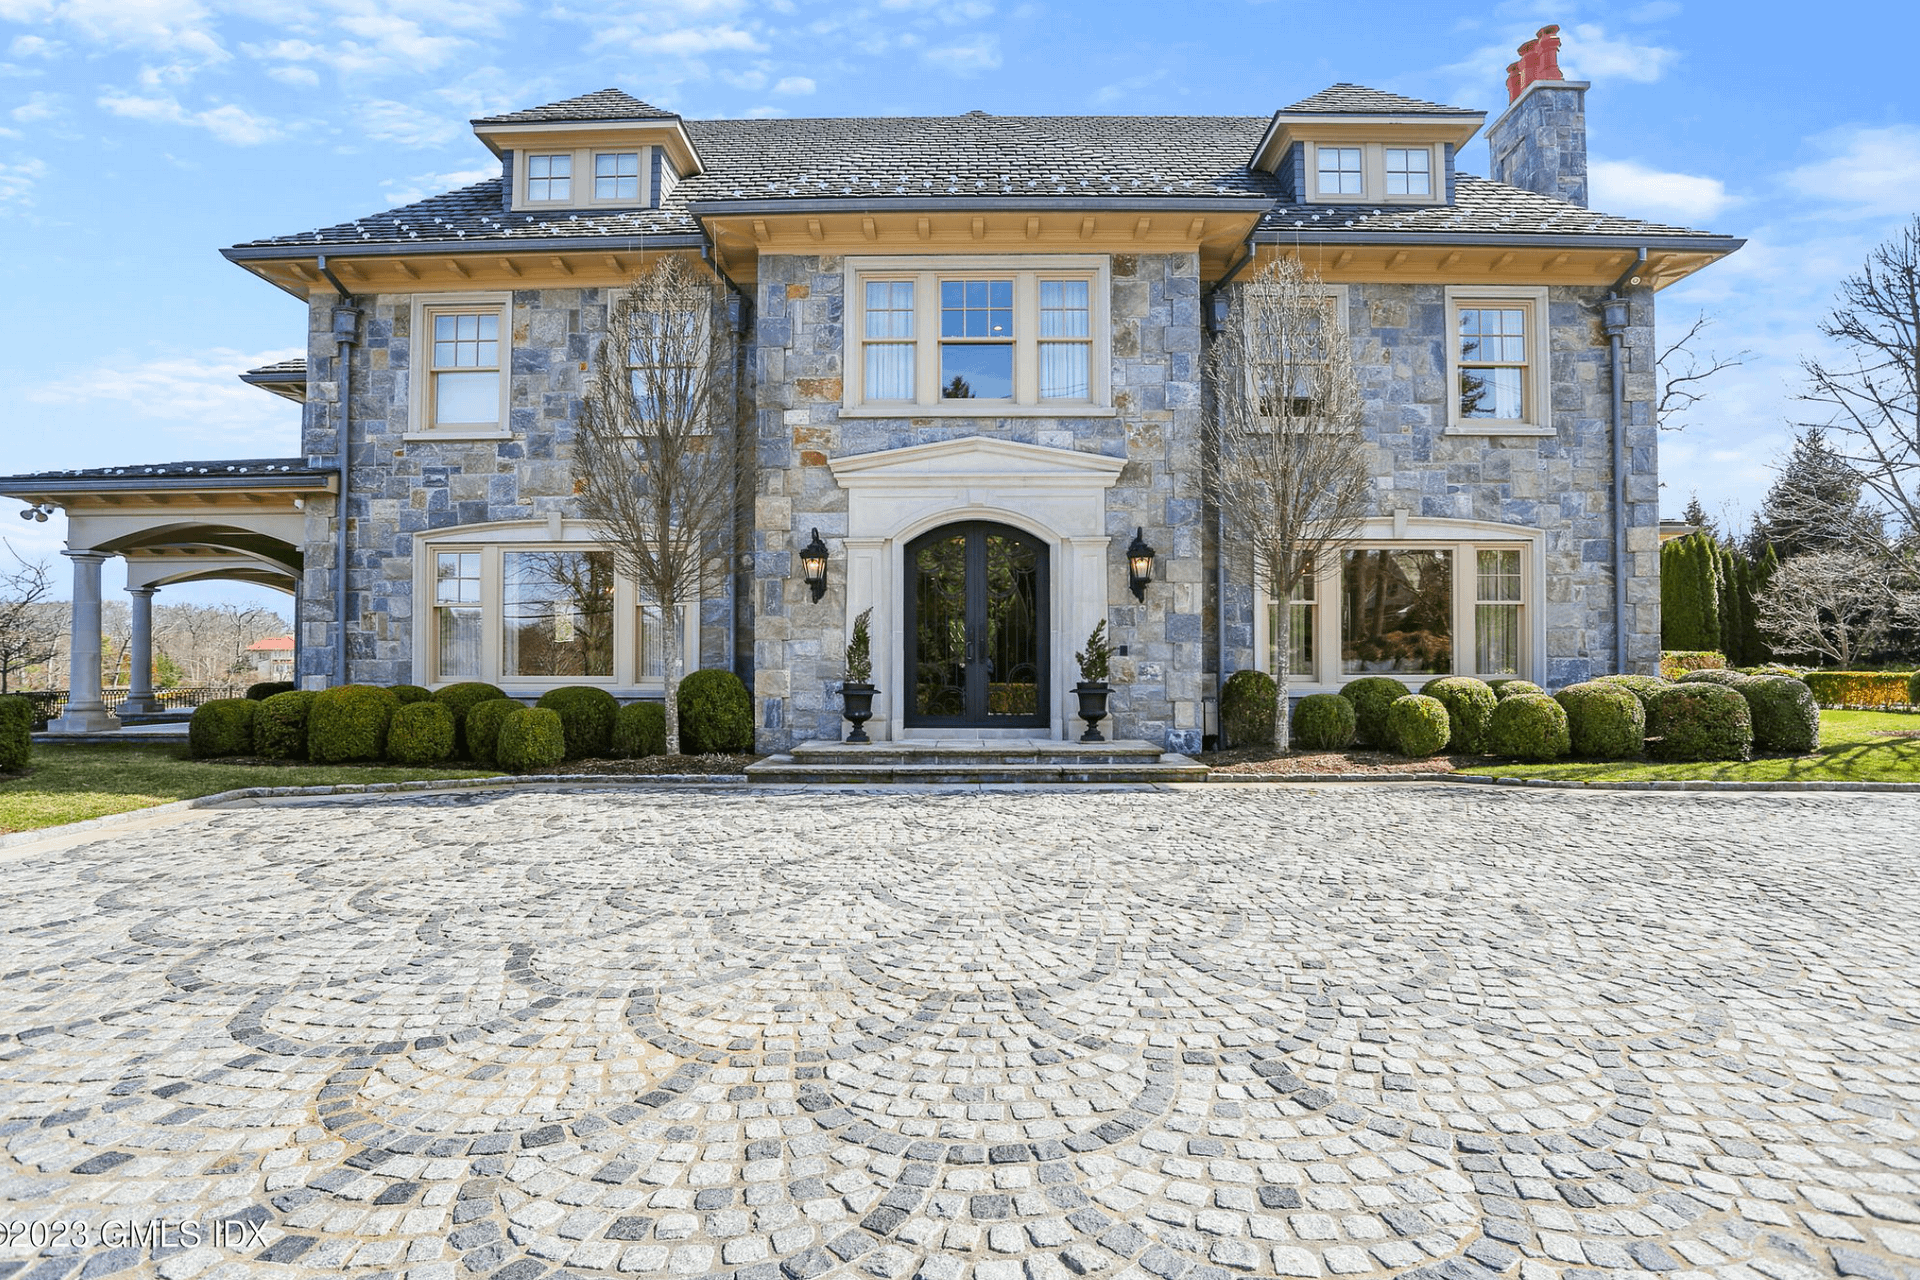 Waterfront Connecticut Home With 30-Car Garage (PHOTOS)